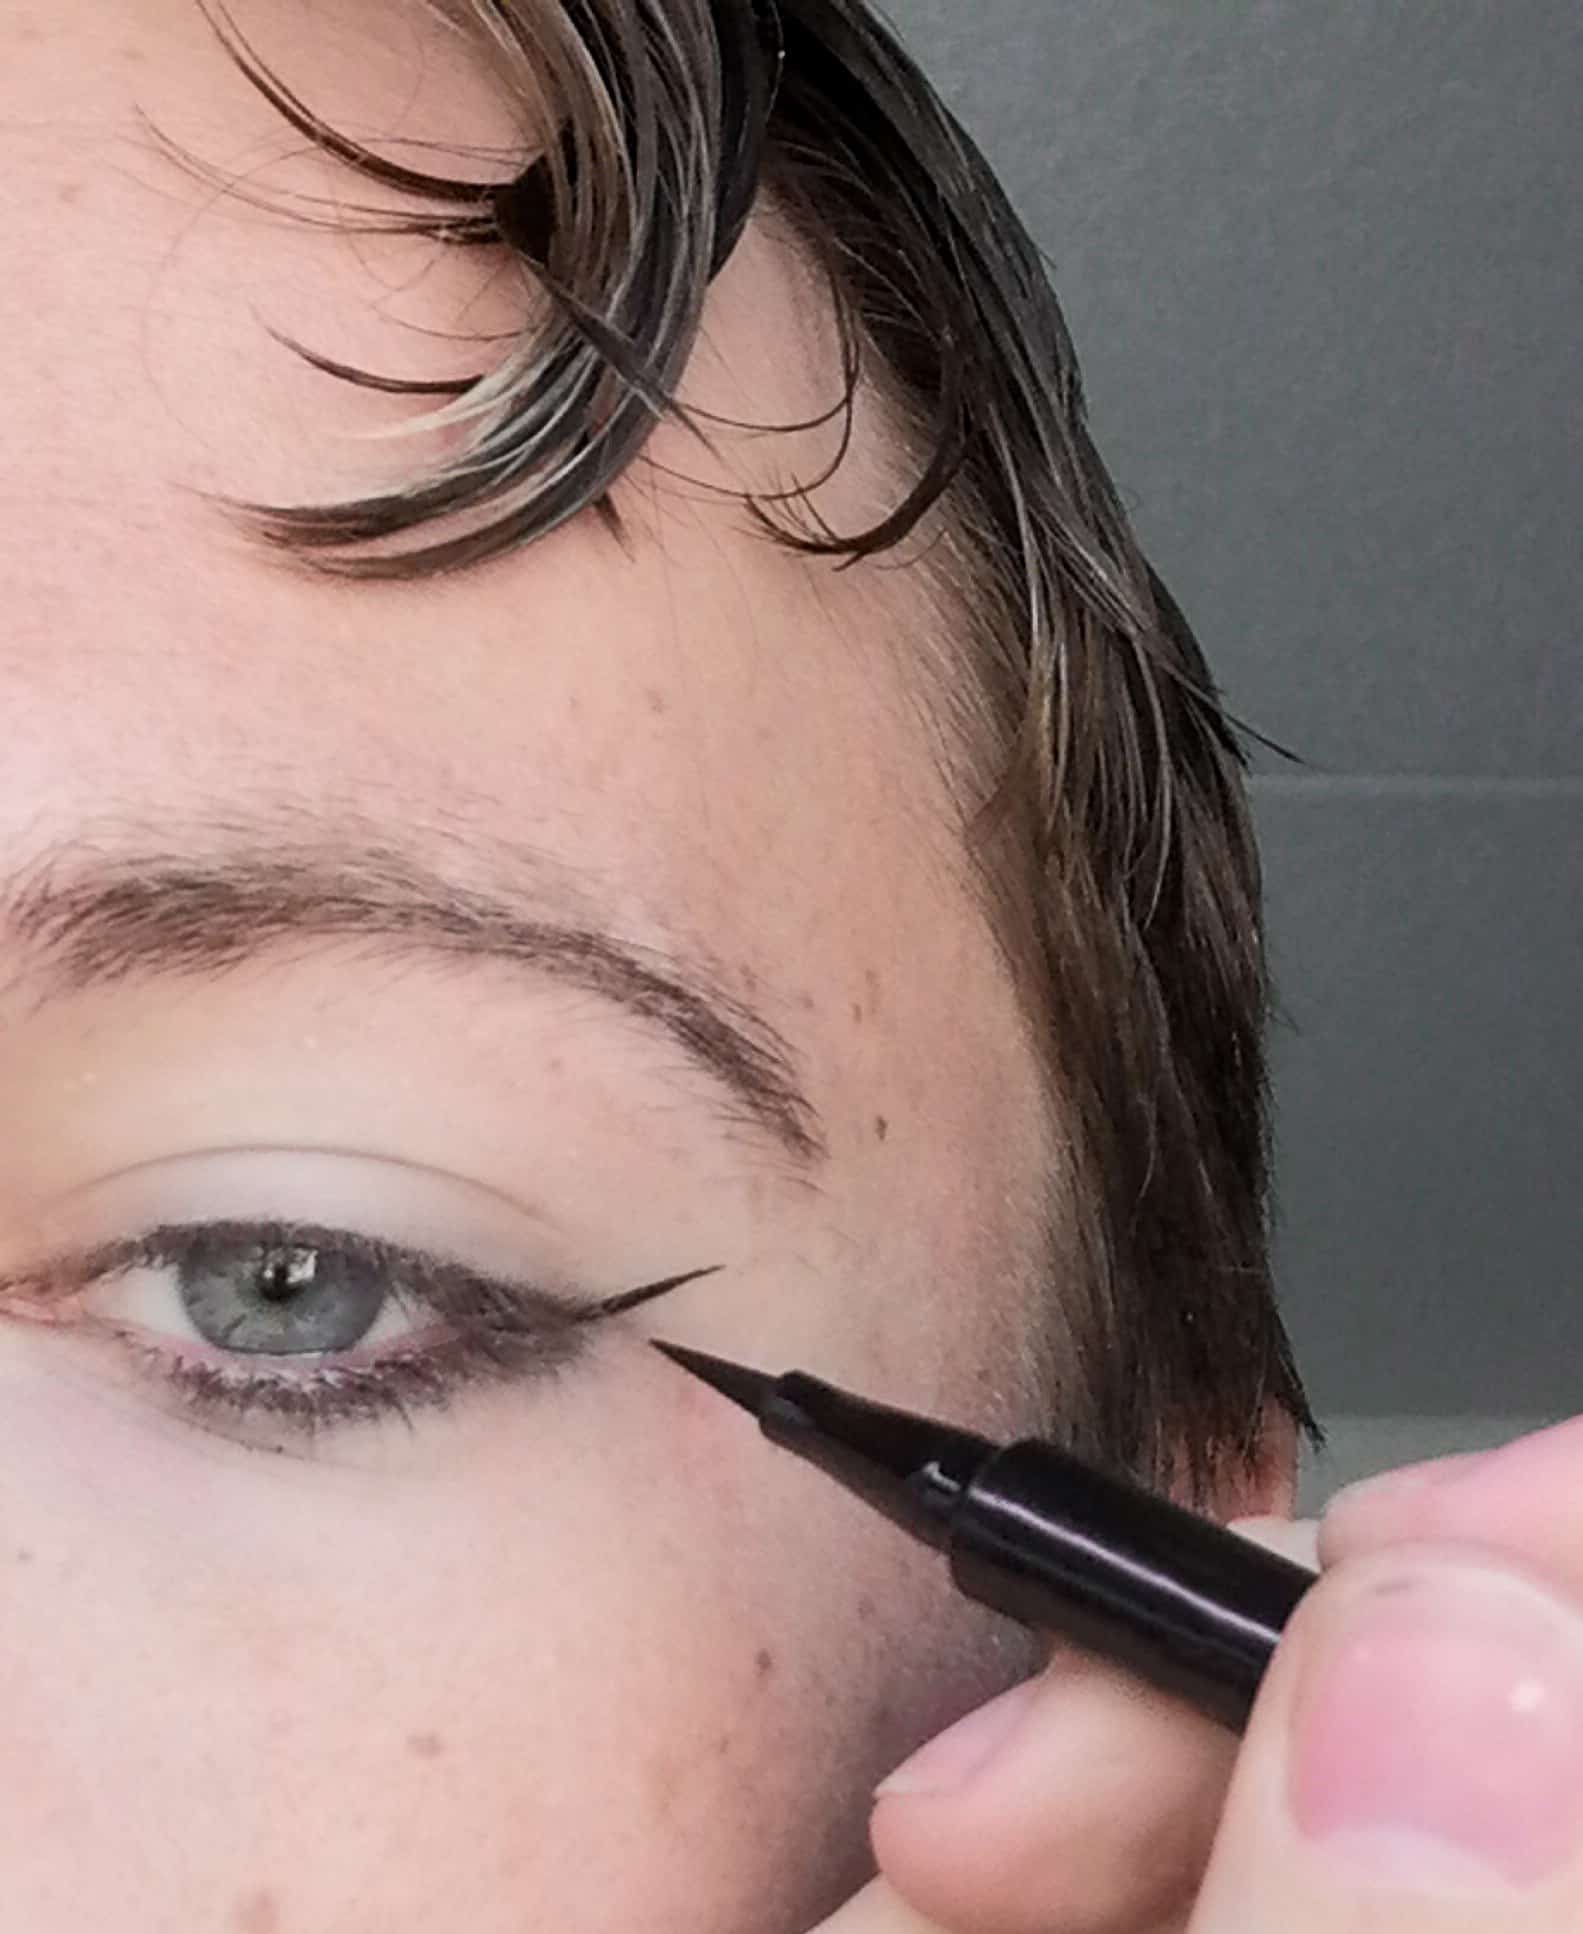 A man demonstrating how to apply a cruelty-free black eyeliner